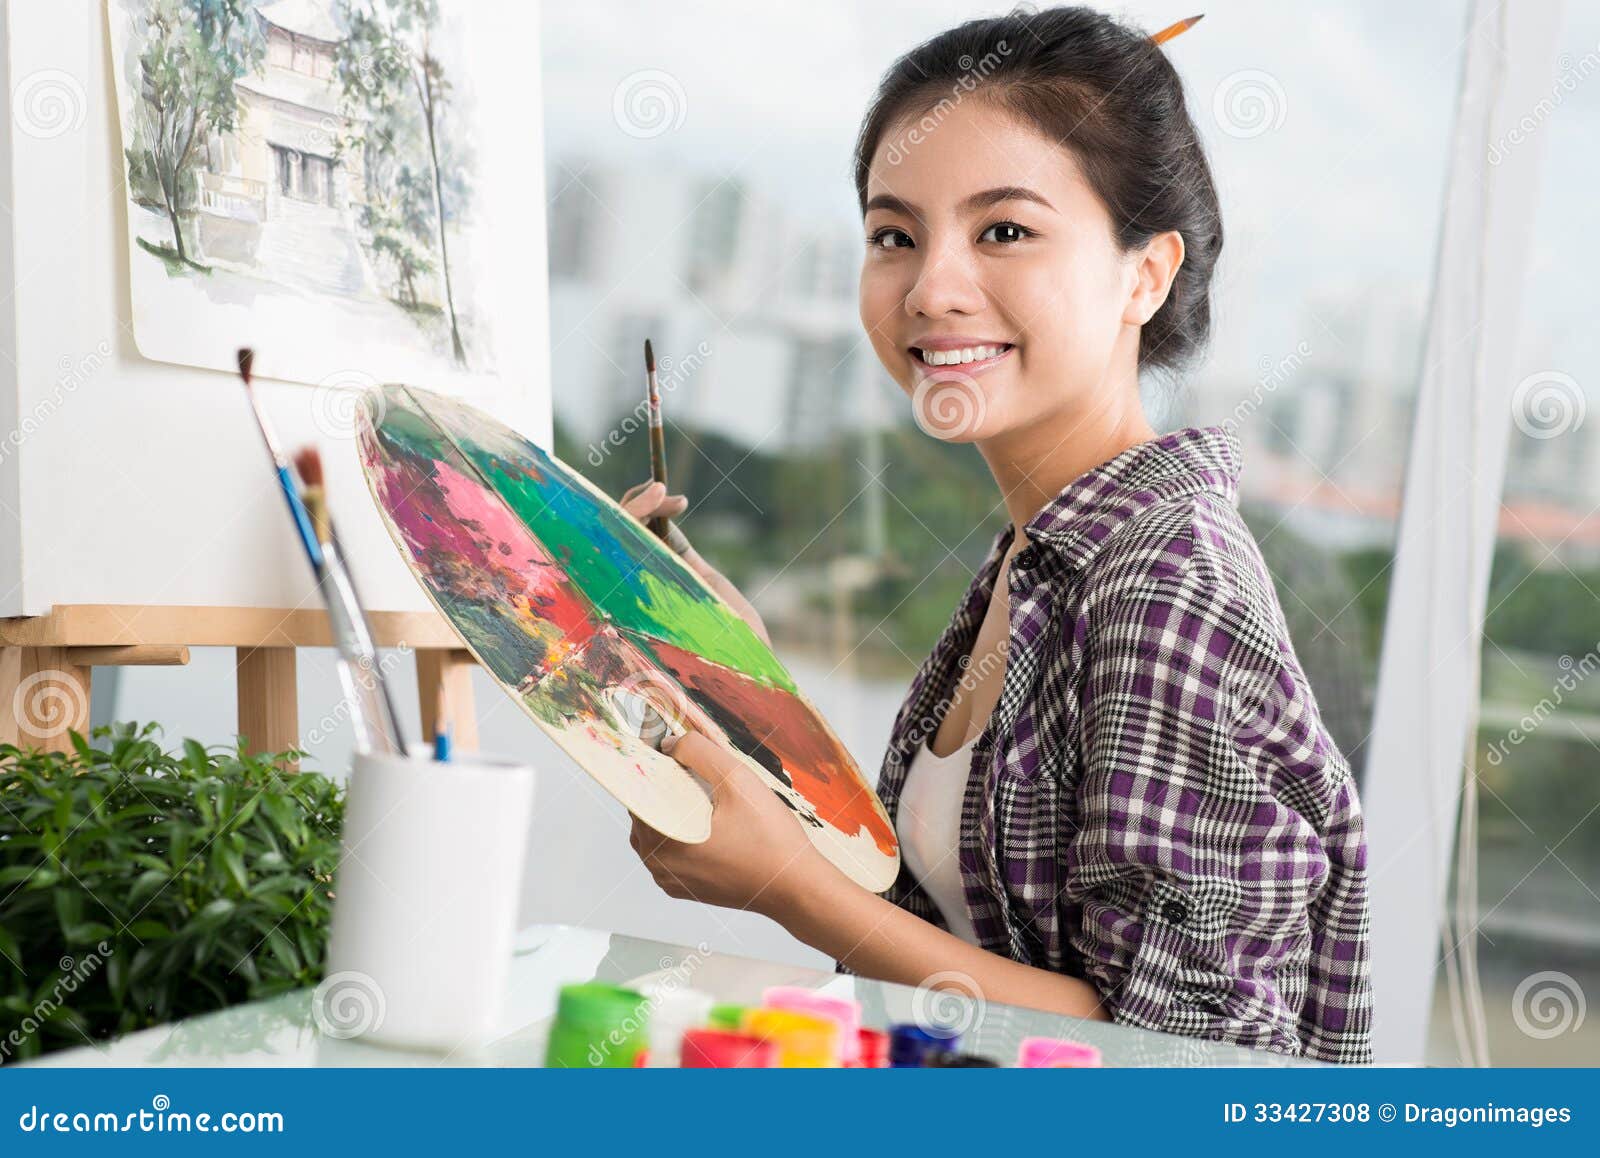 artist work portrait happy palette hands foreground 33427308 Selling Photos Online for Beginners